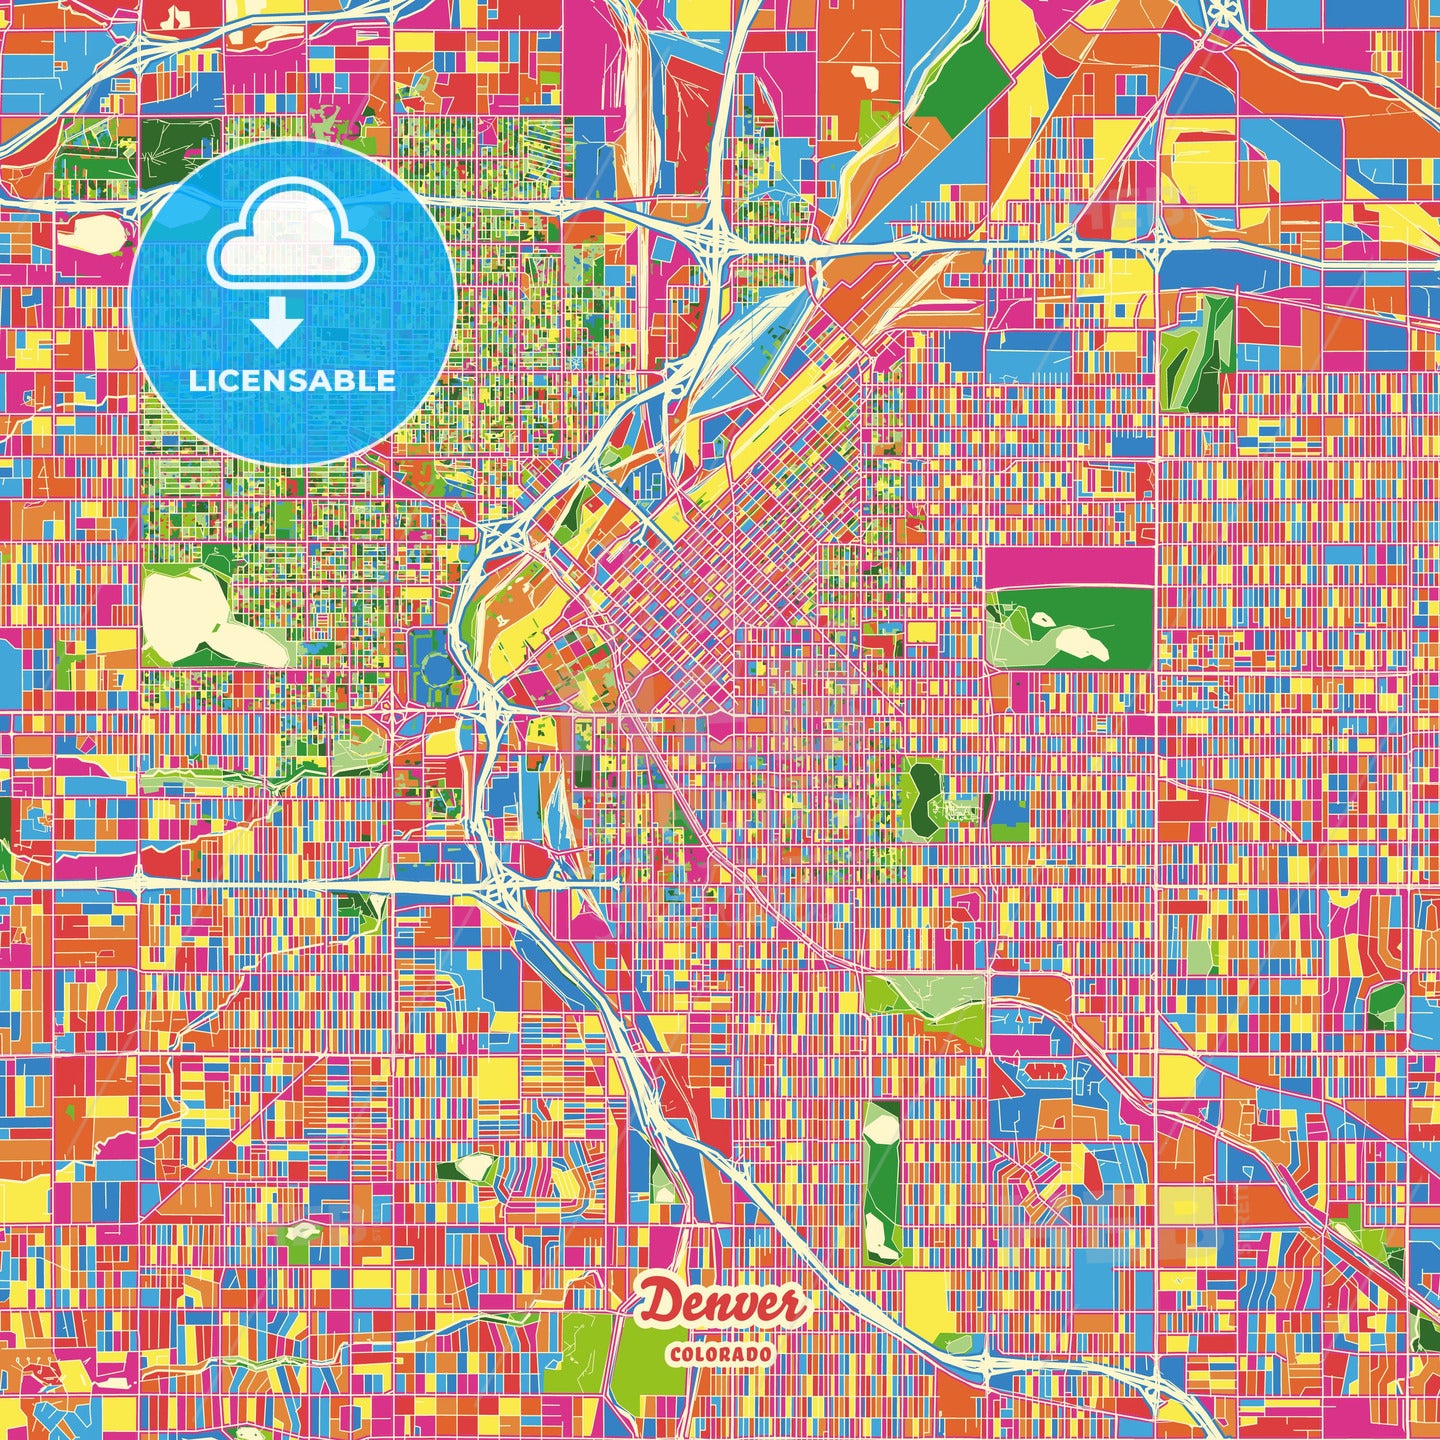 Denver, United States Crazy Colorful Street Map Poster Template - HEBSTREITS Sketches